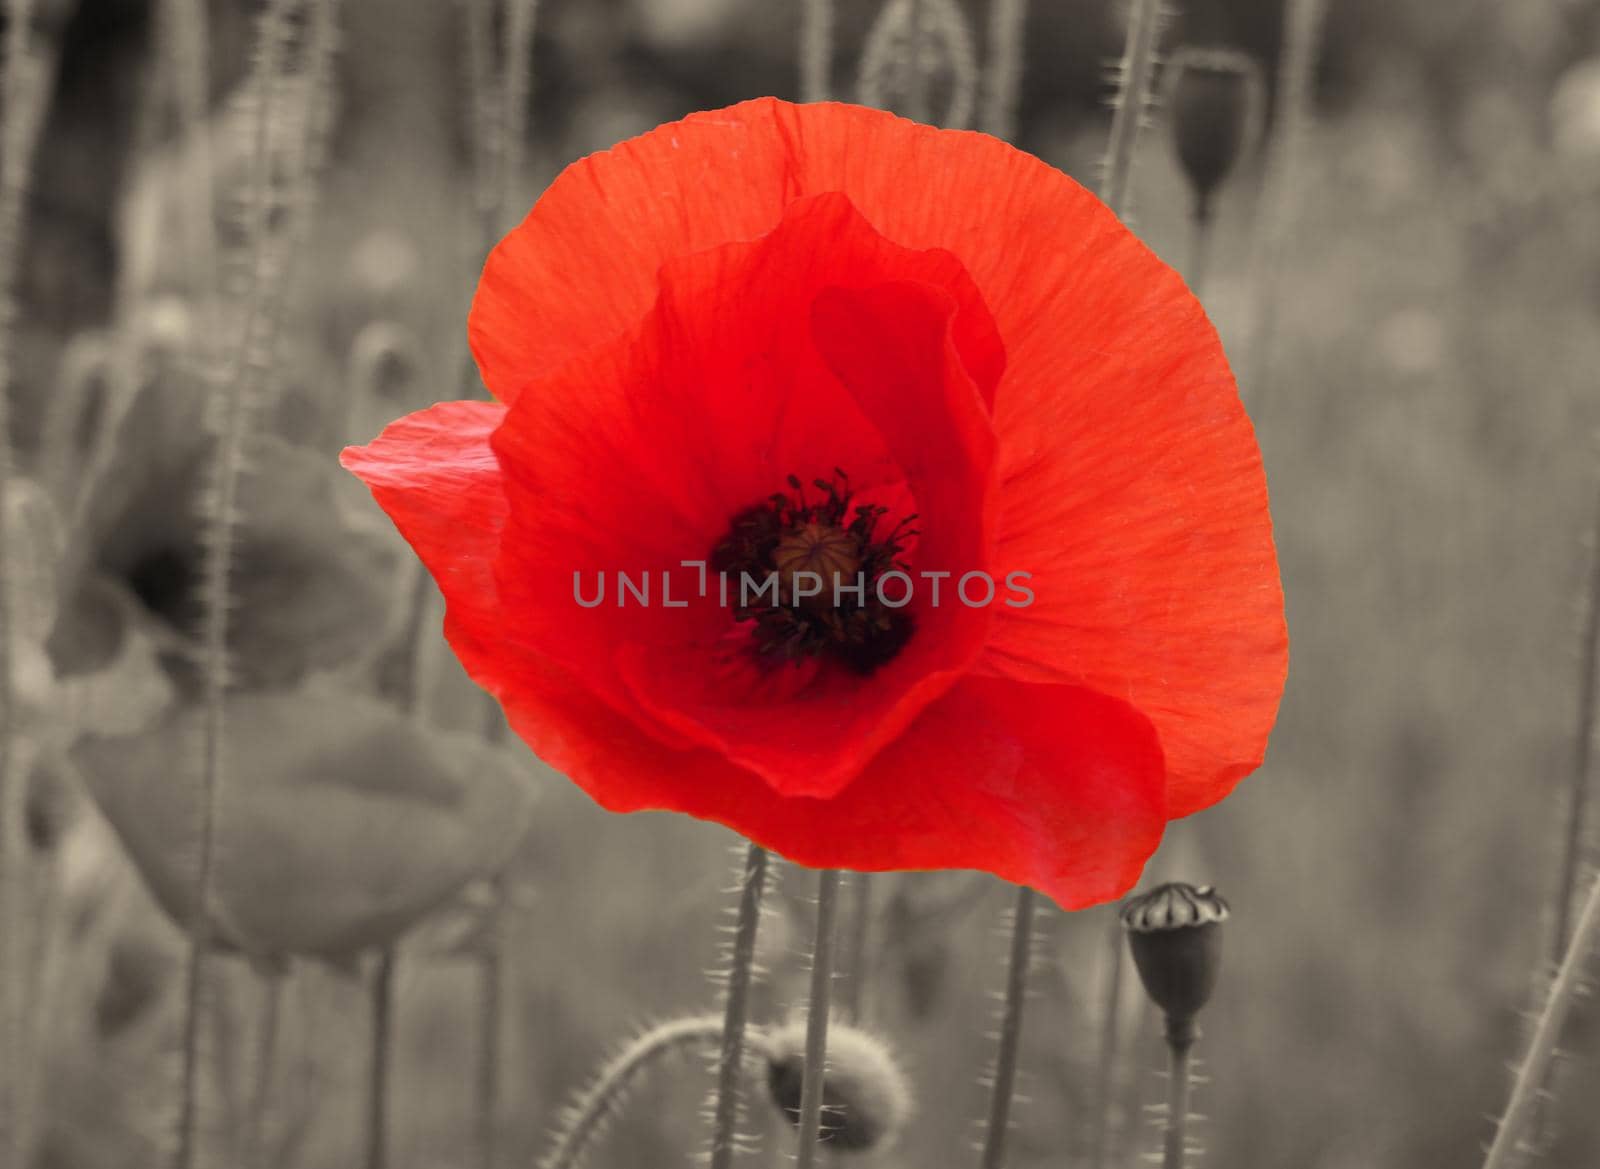 a close up of a bright red common poppy flower on a vintage sepia background - war remembrance concept